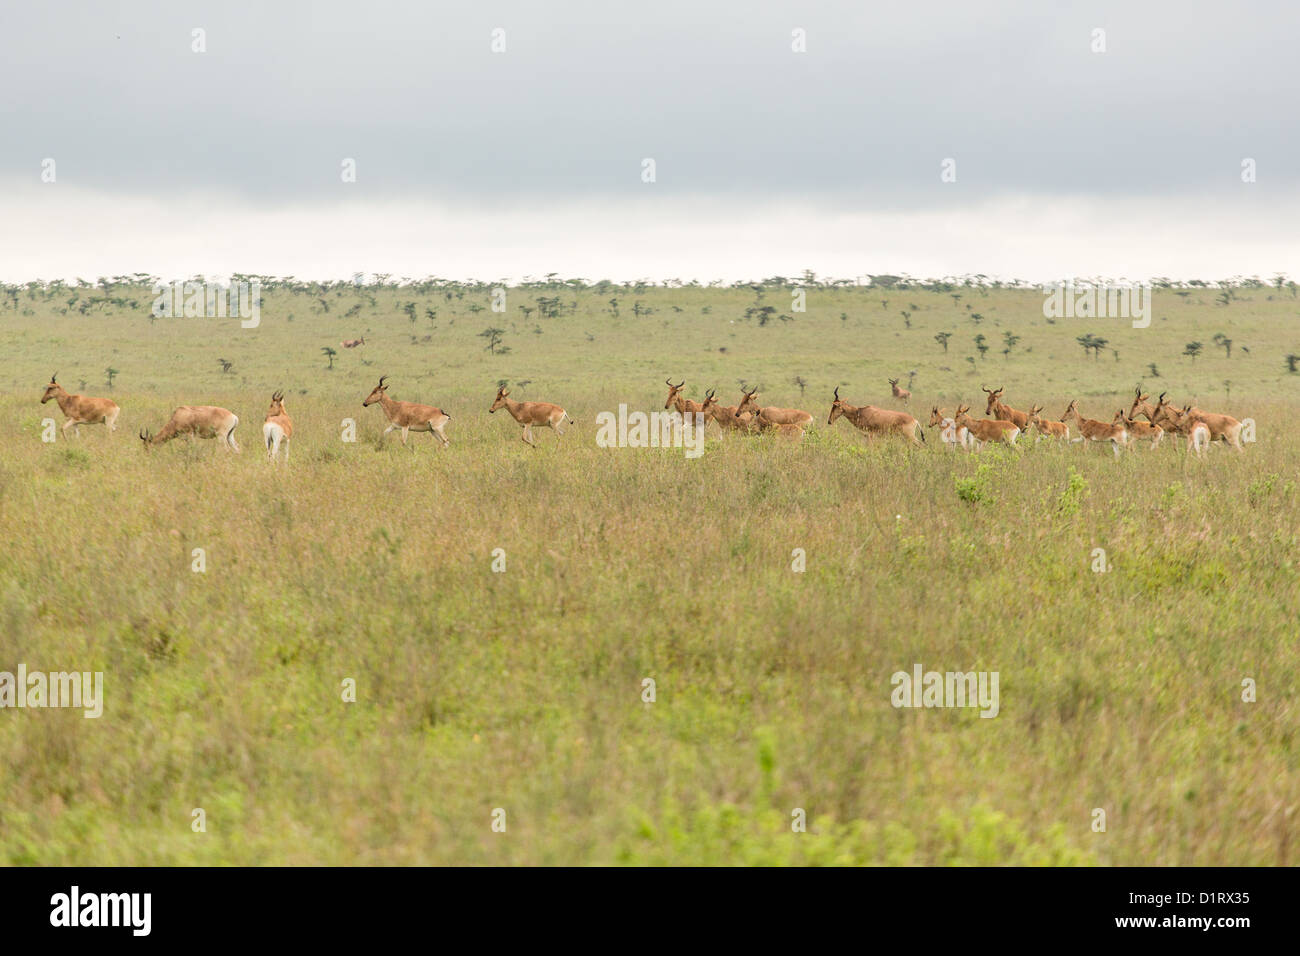 A group of impalas in the grasslands of the Nairobi National Park Stock Photo